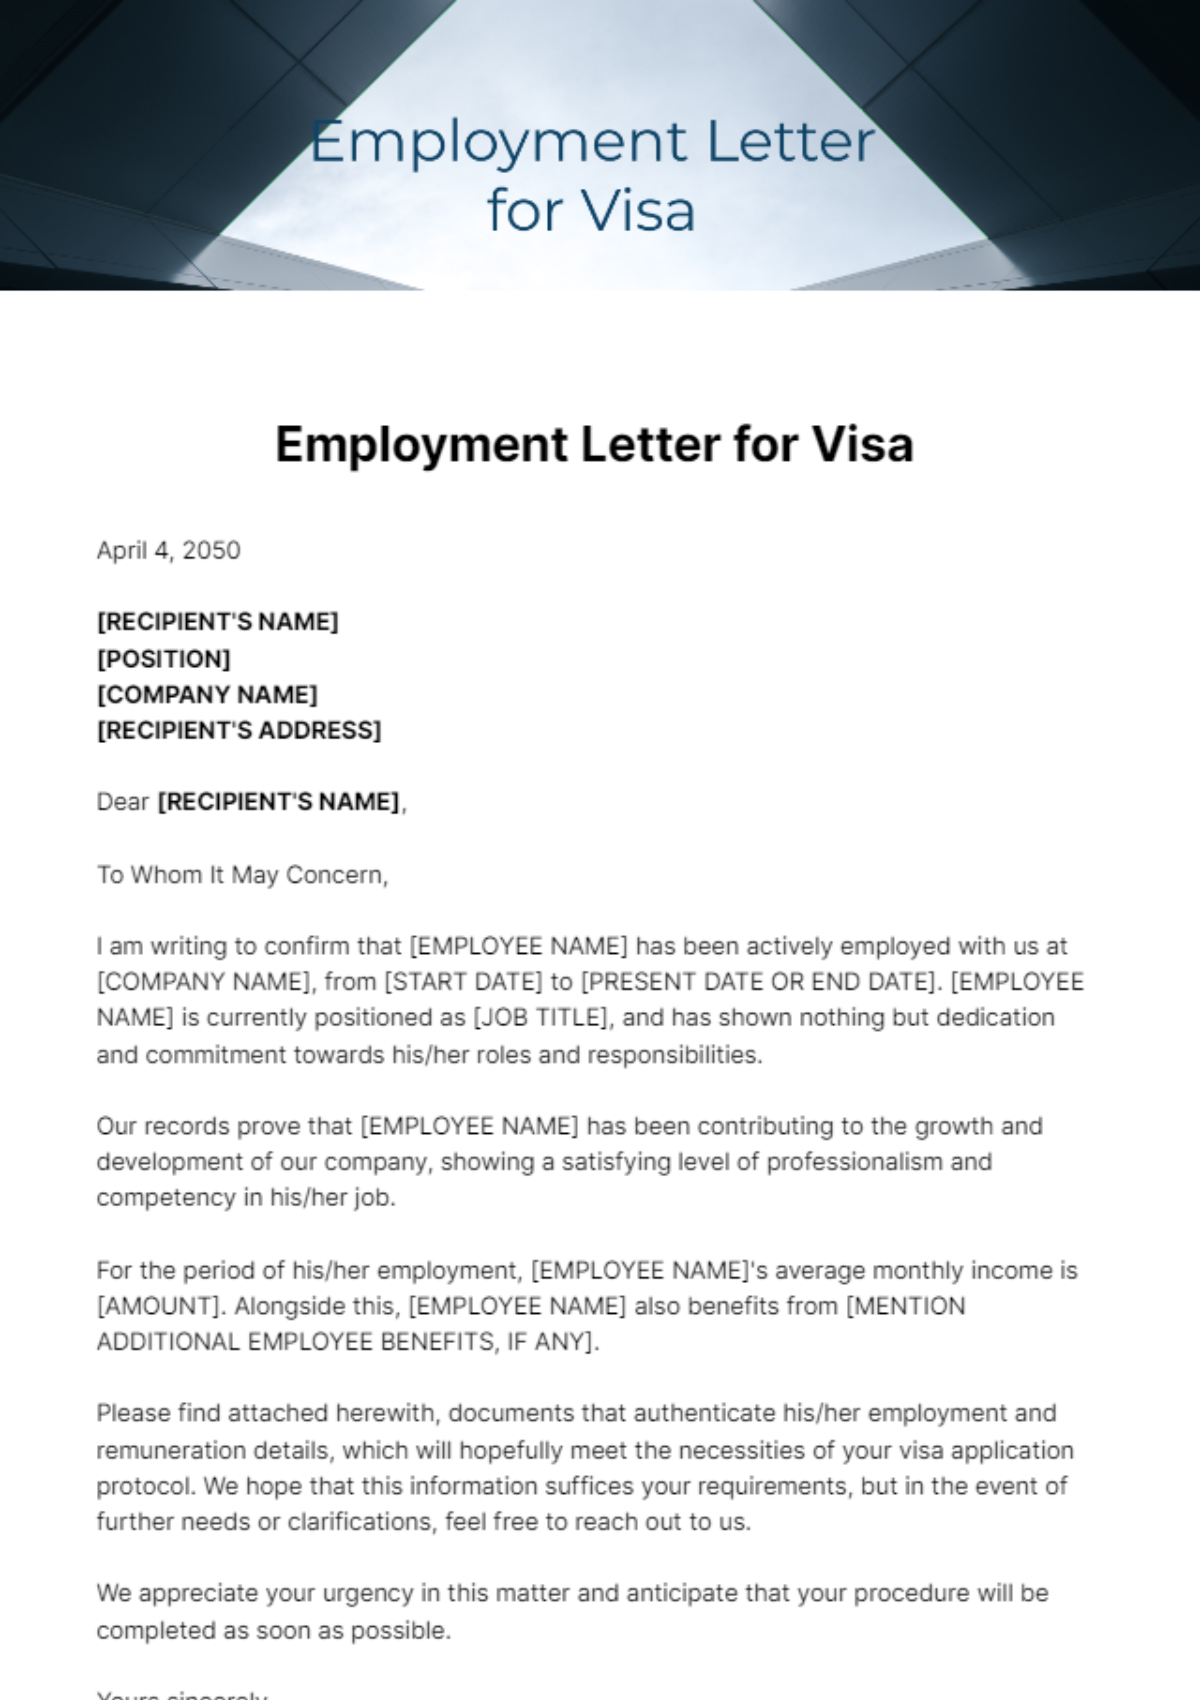 Free Employment Letter for Visa Template